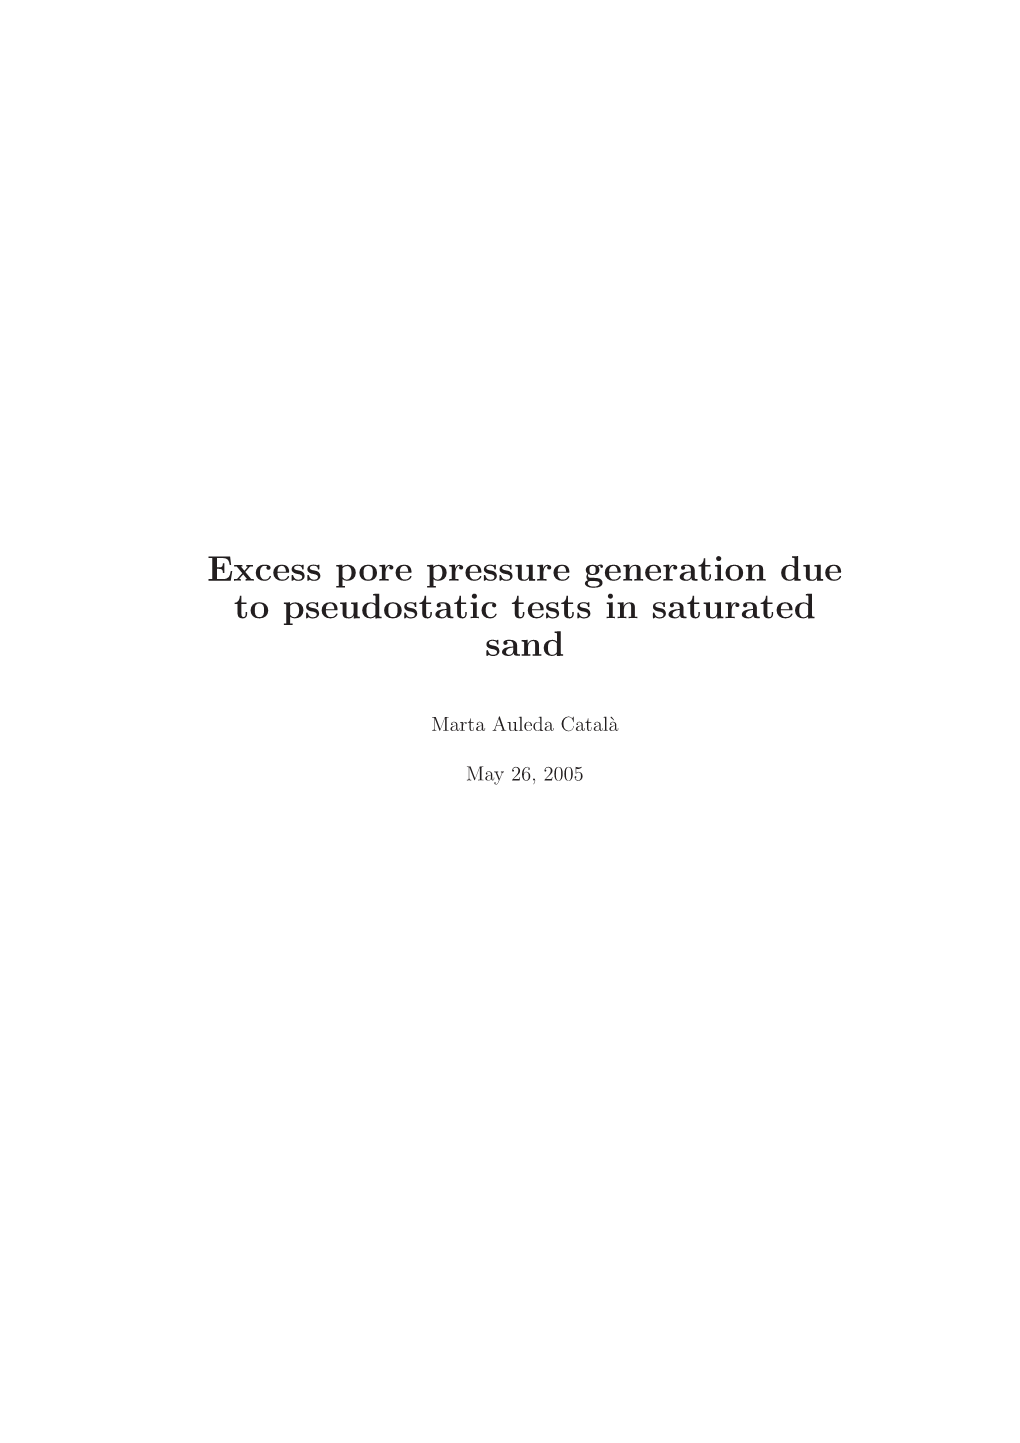 Excess Pore Pressure Generation Due to Pseudostatic Tests in Saturated Sand